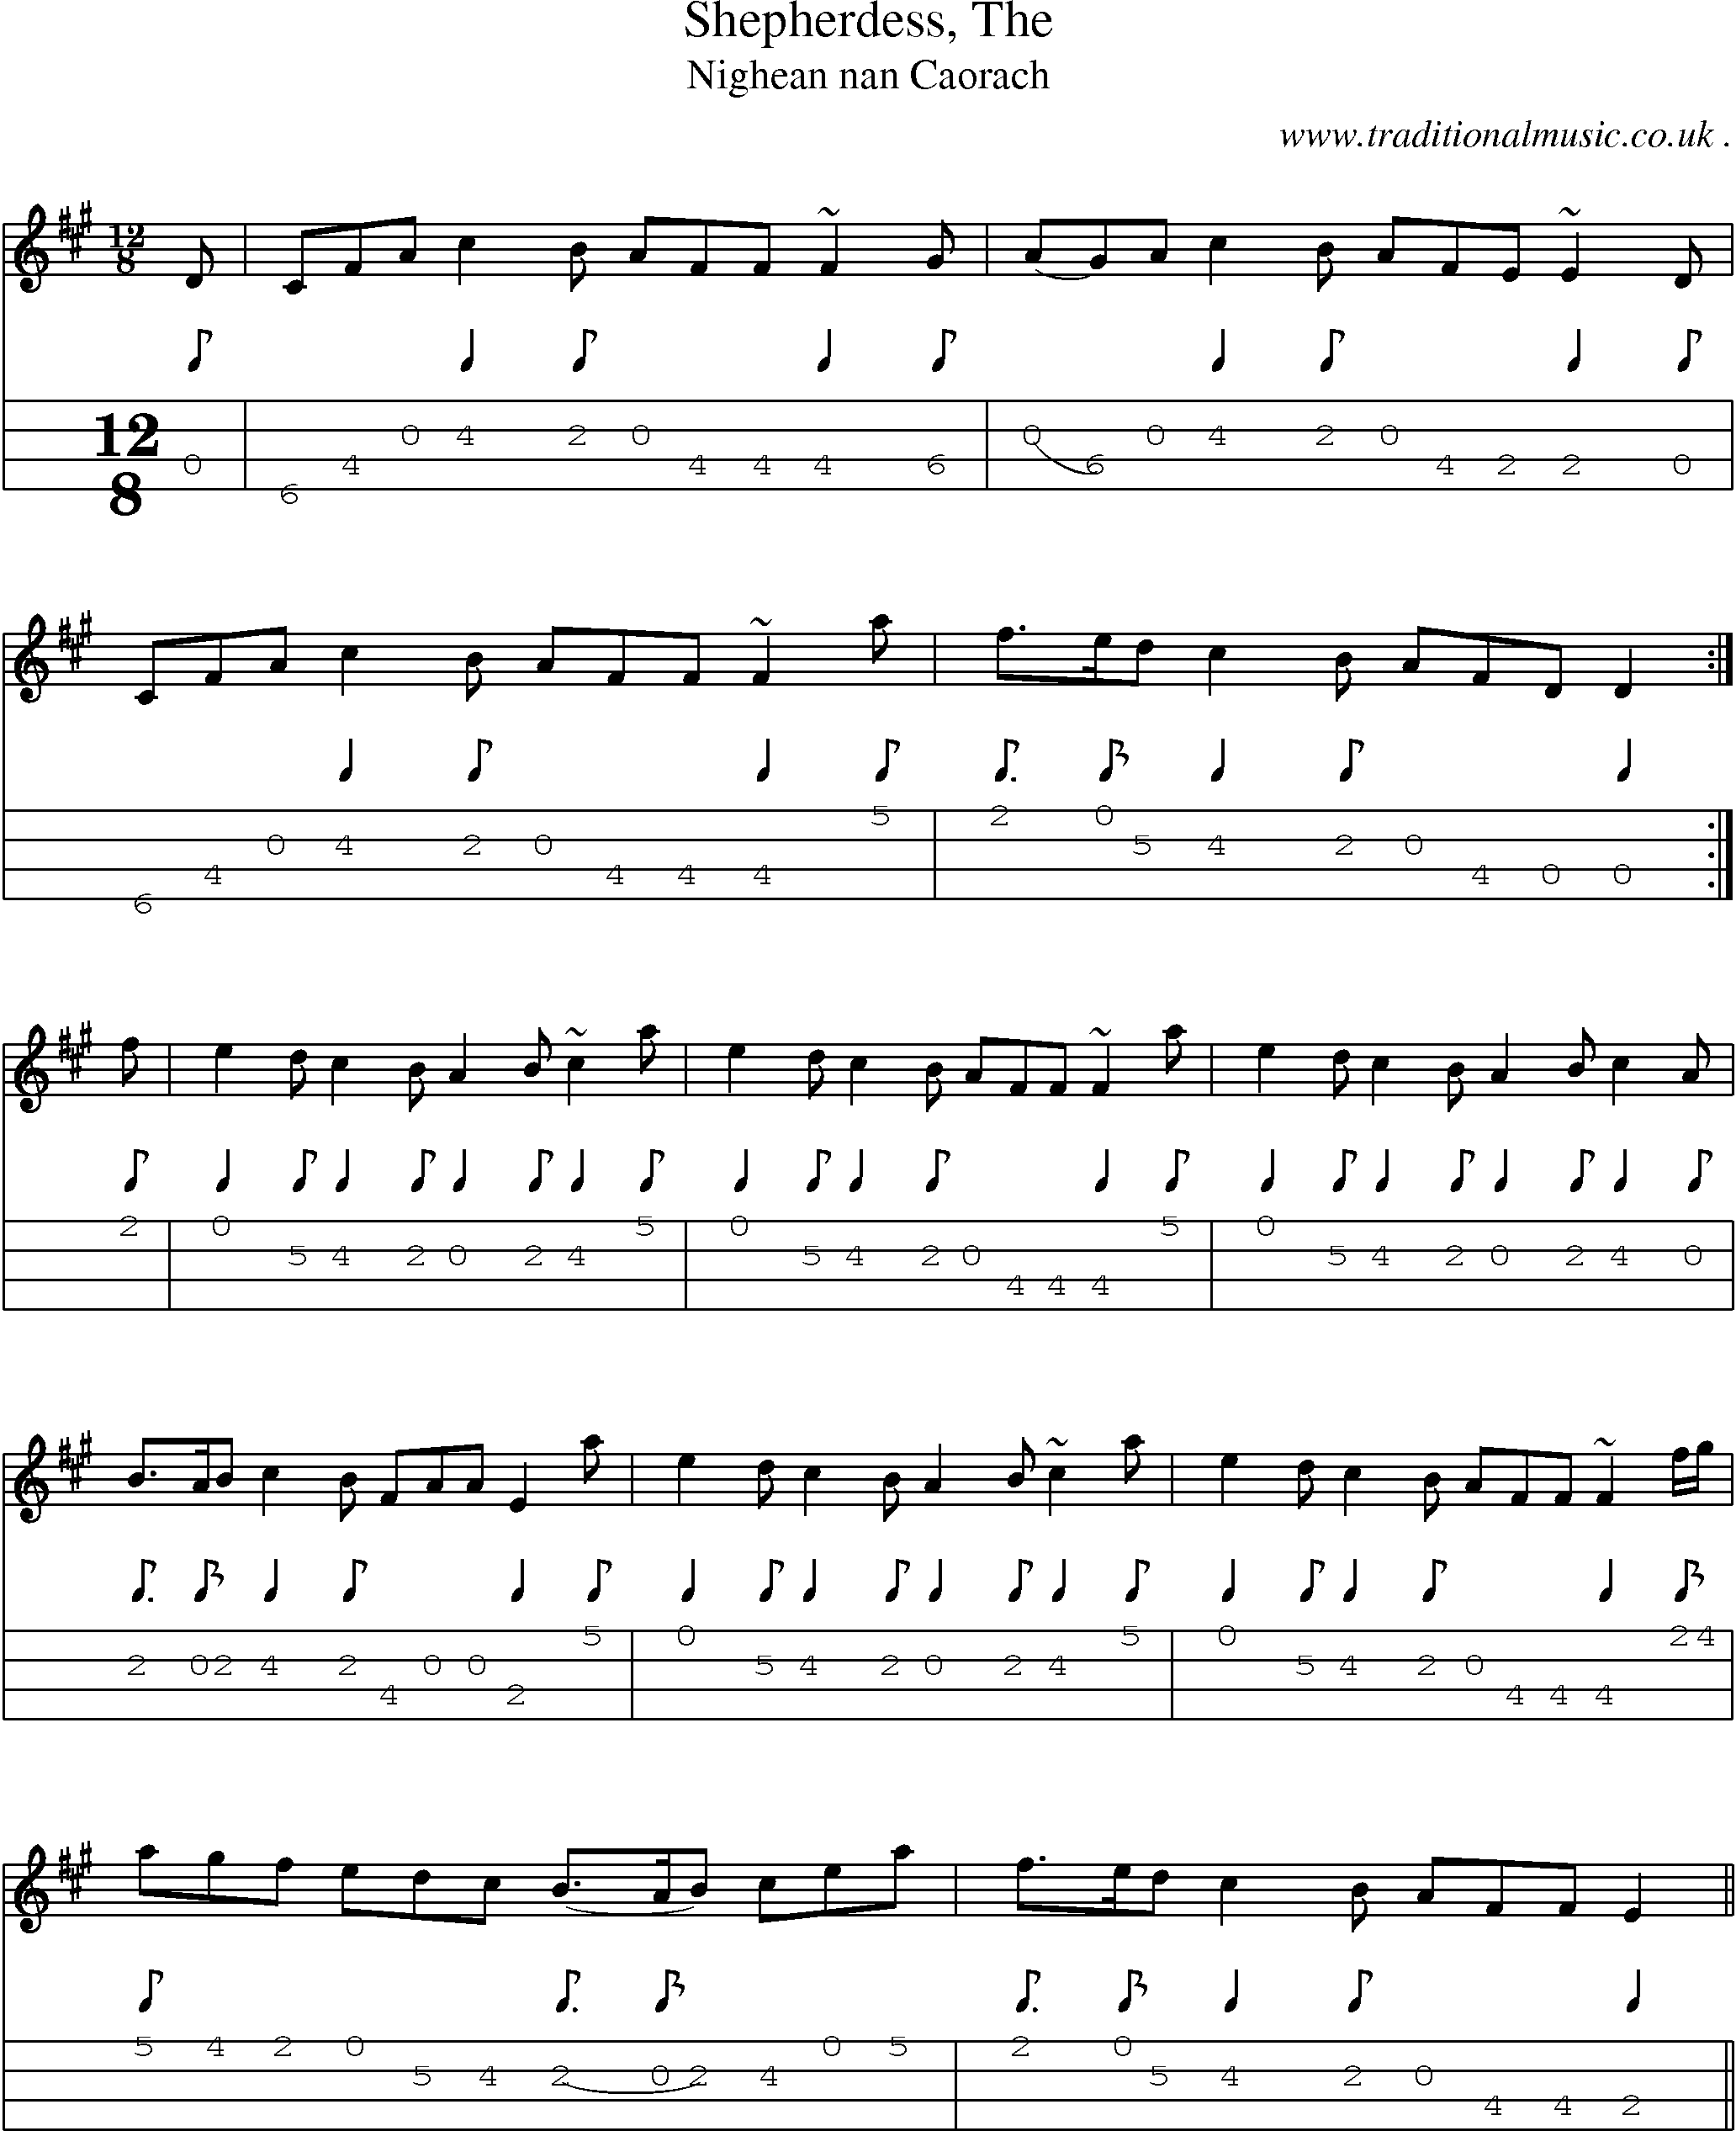 Sheet-music  score, Chords and Mandolin Tabs for Shepherdess The